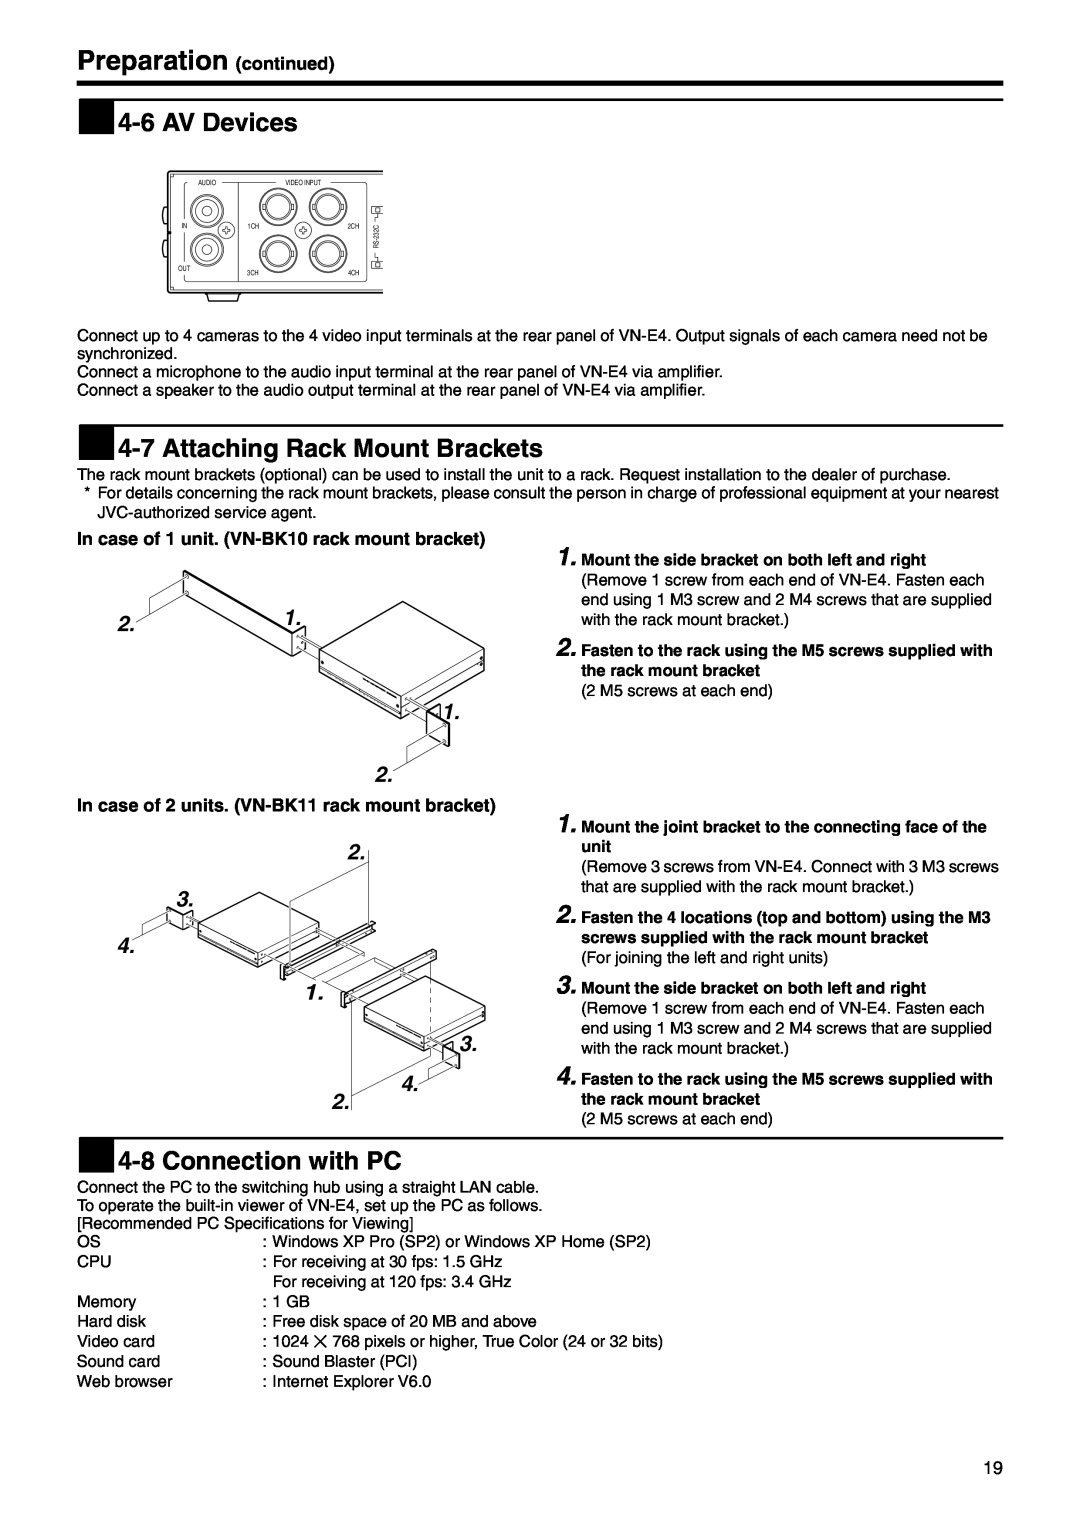 JVC VN-E4 manual  4-6 AV Devices,  4-7 Attaching Rack Mount Brackets,  4-8 Connection with PC, Preparation continued 